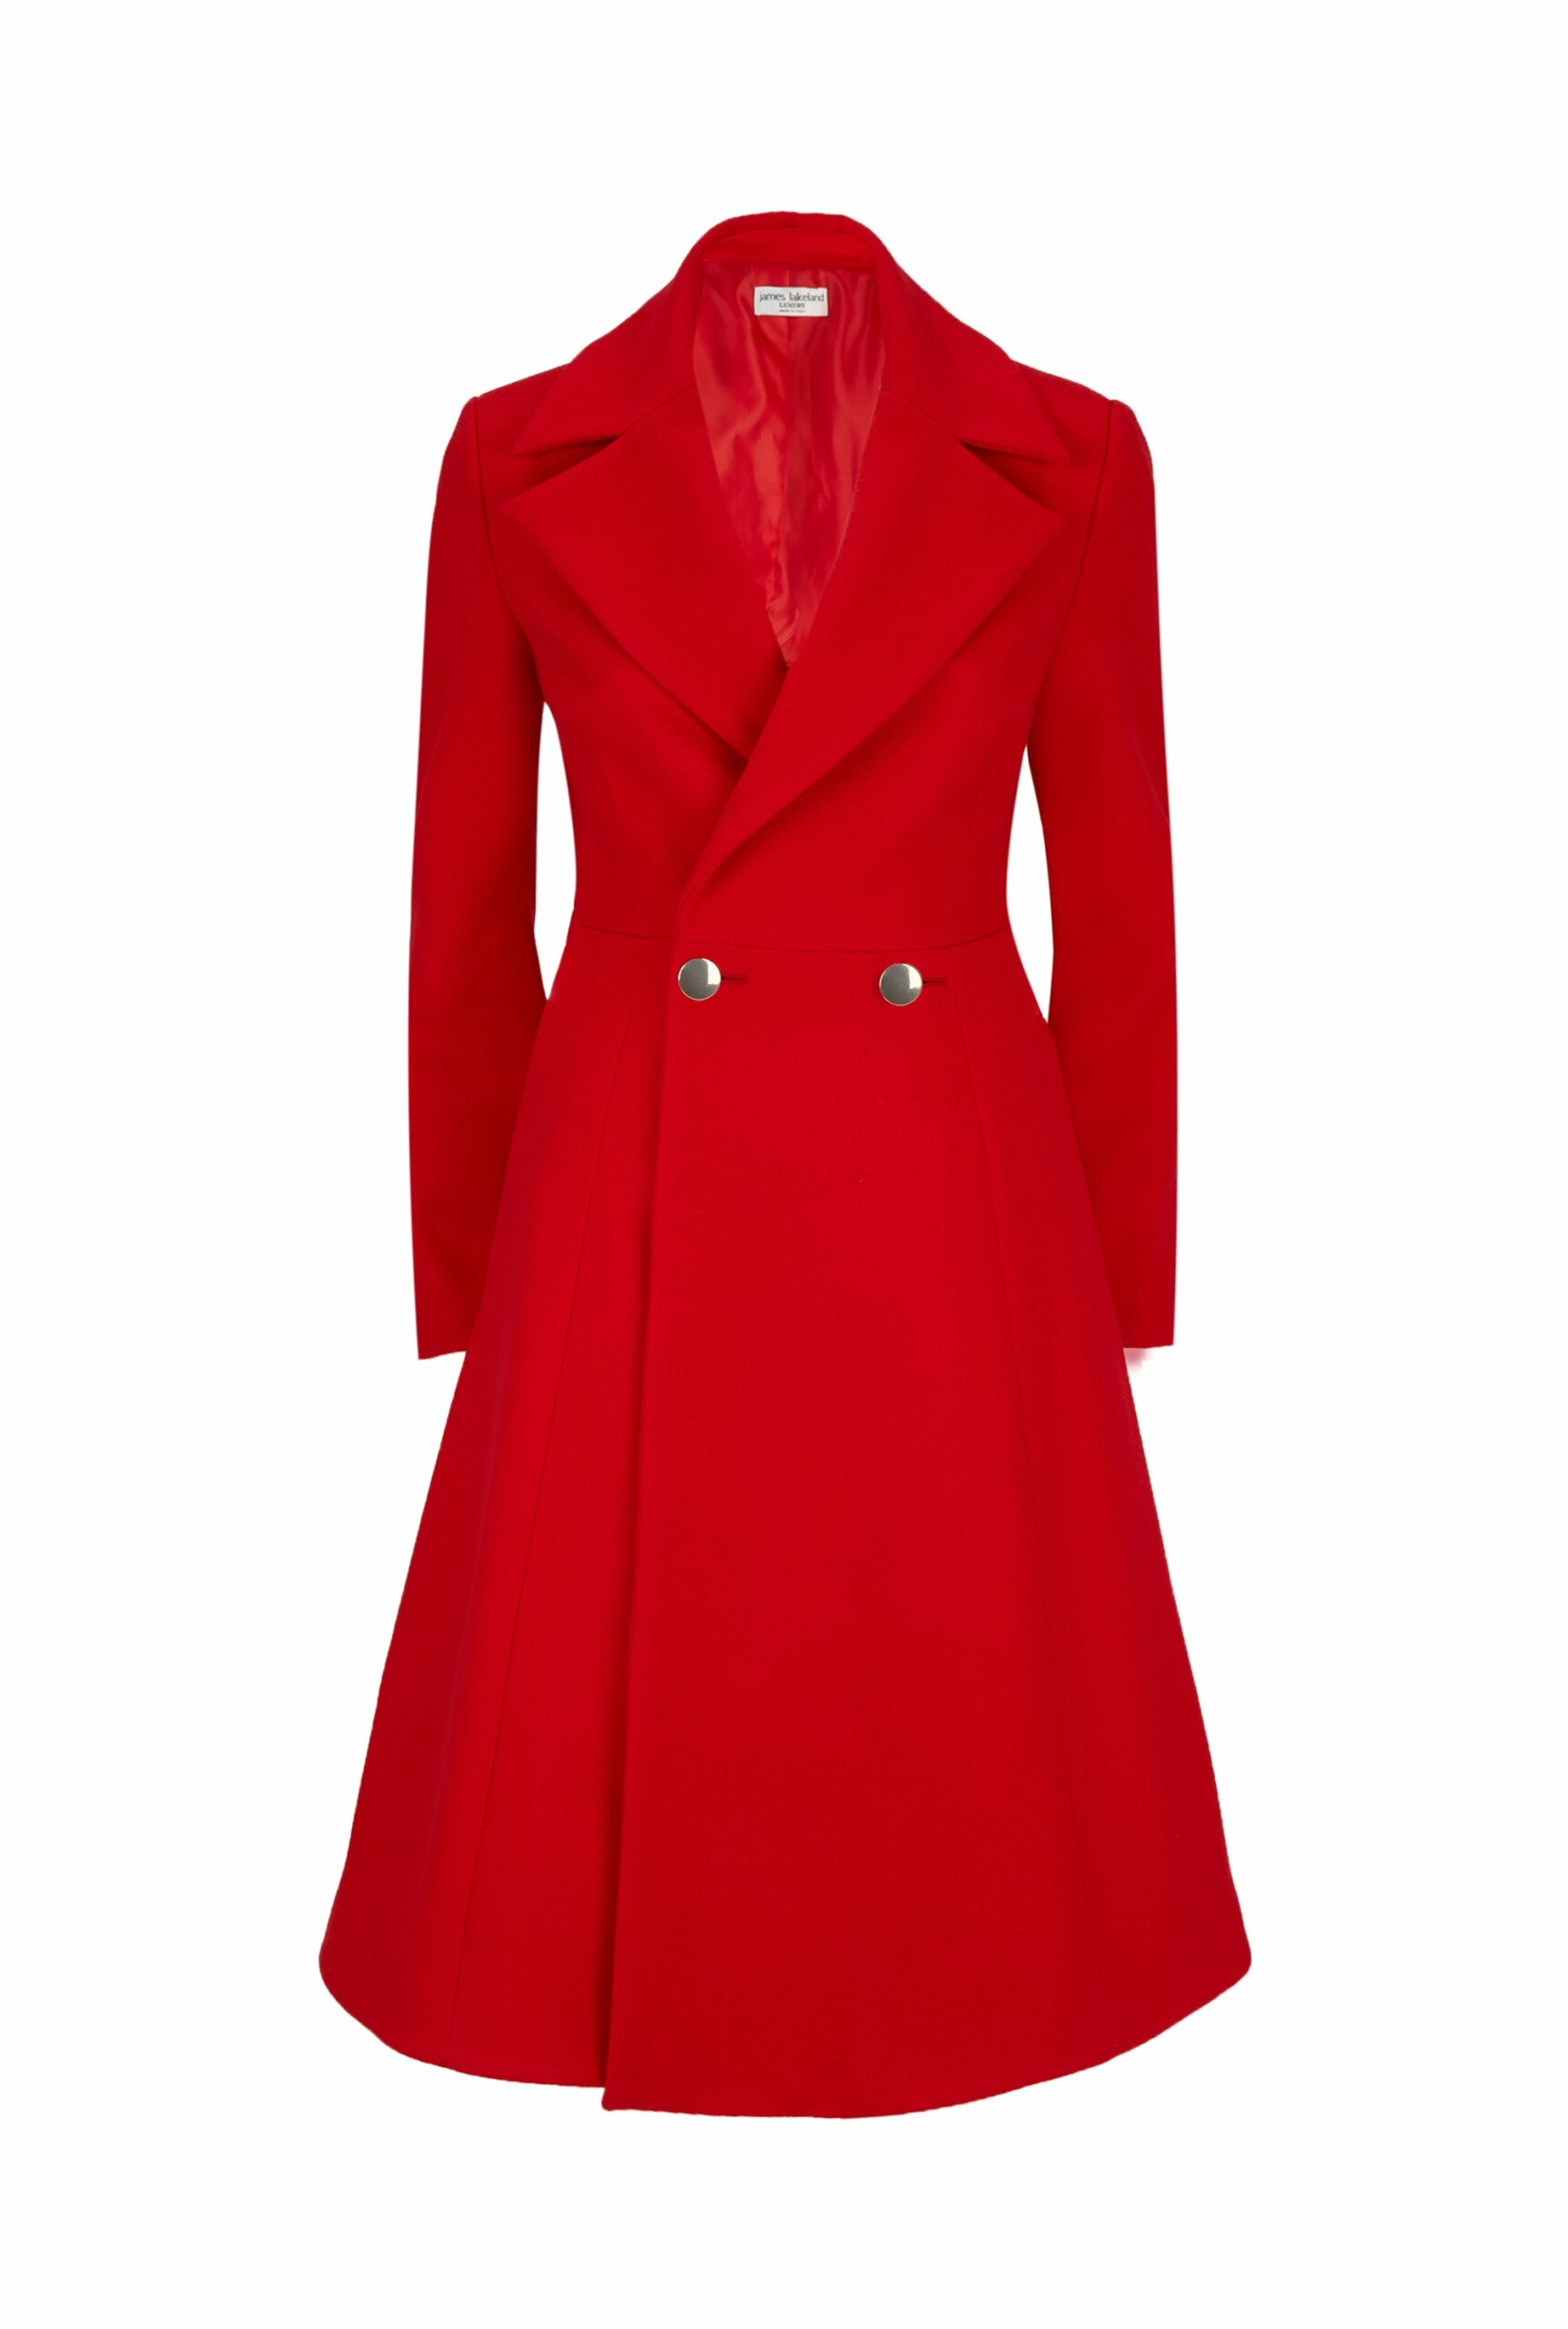 Women's Double Breasted A-Line Coat - Red Extra Small James Lakeland